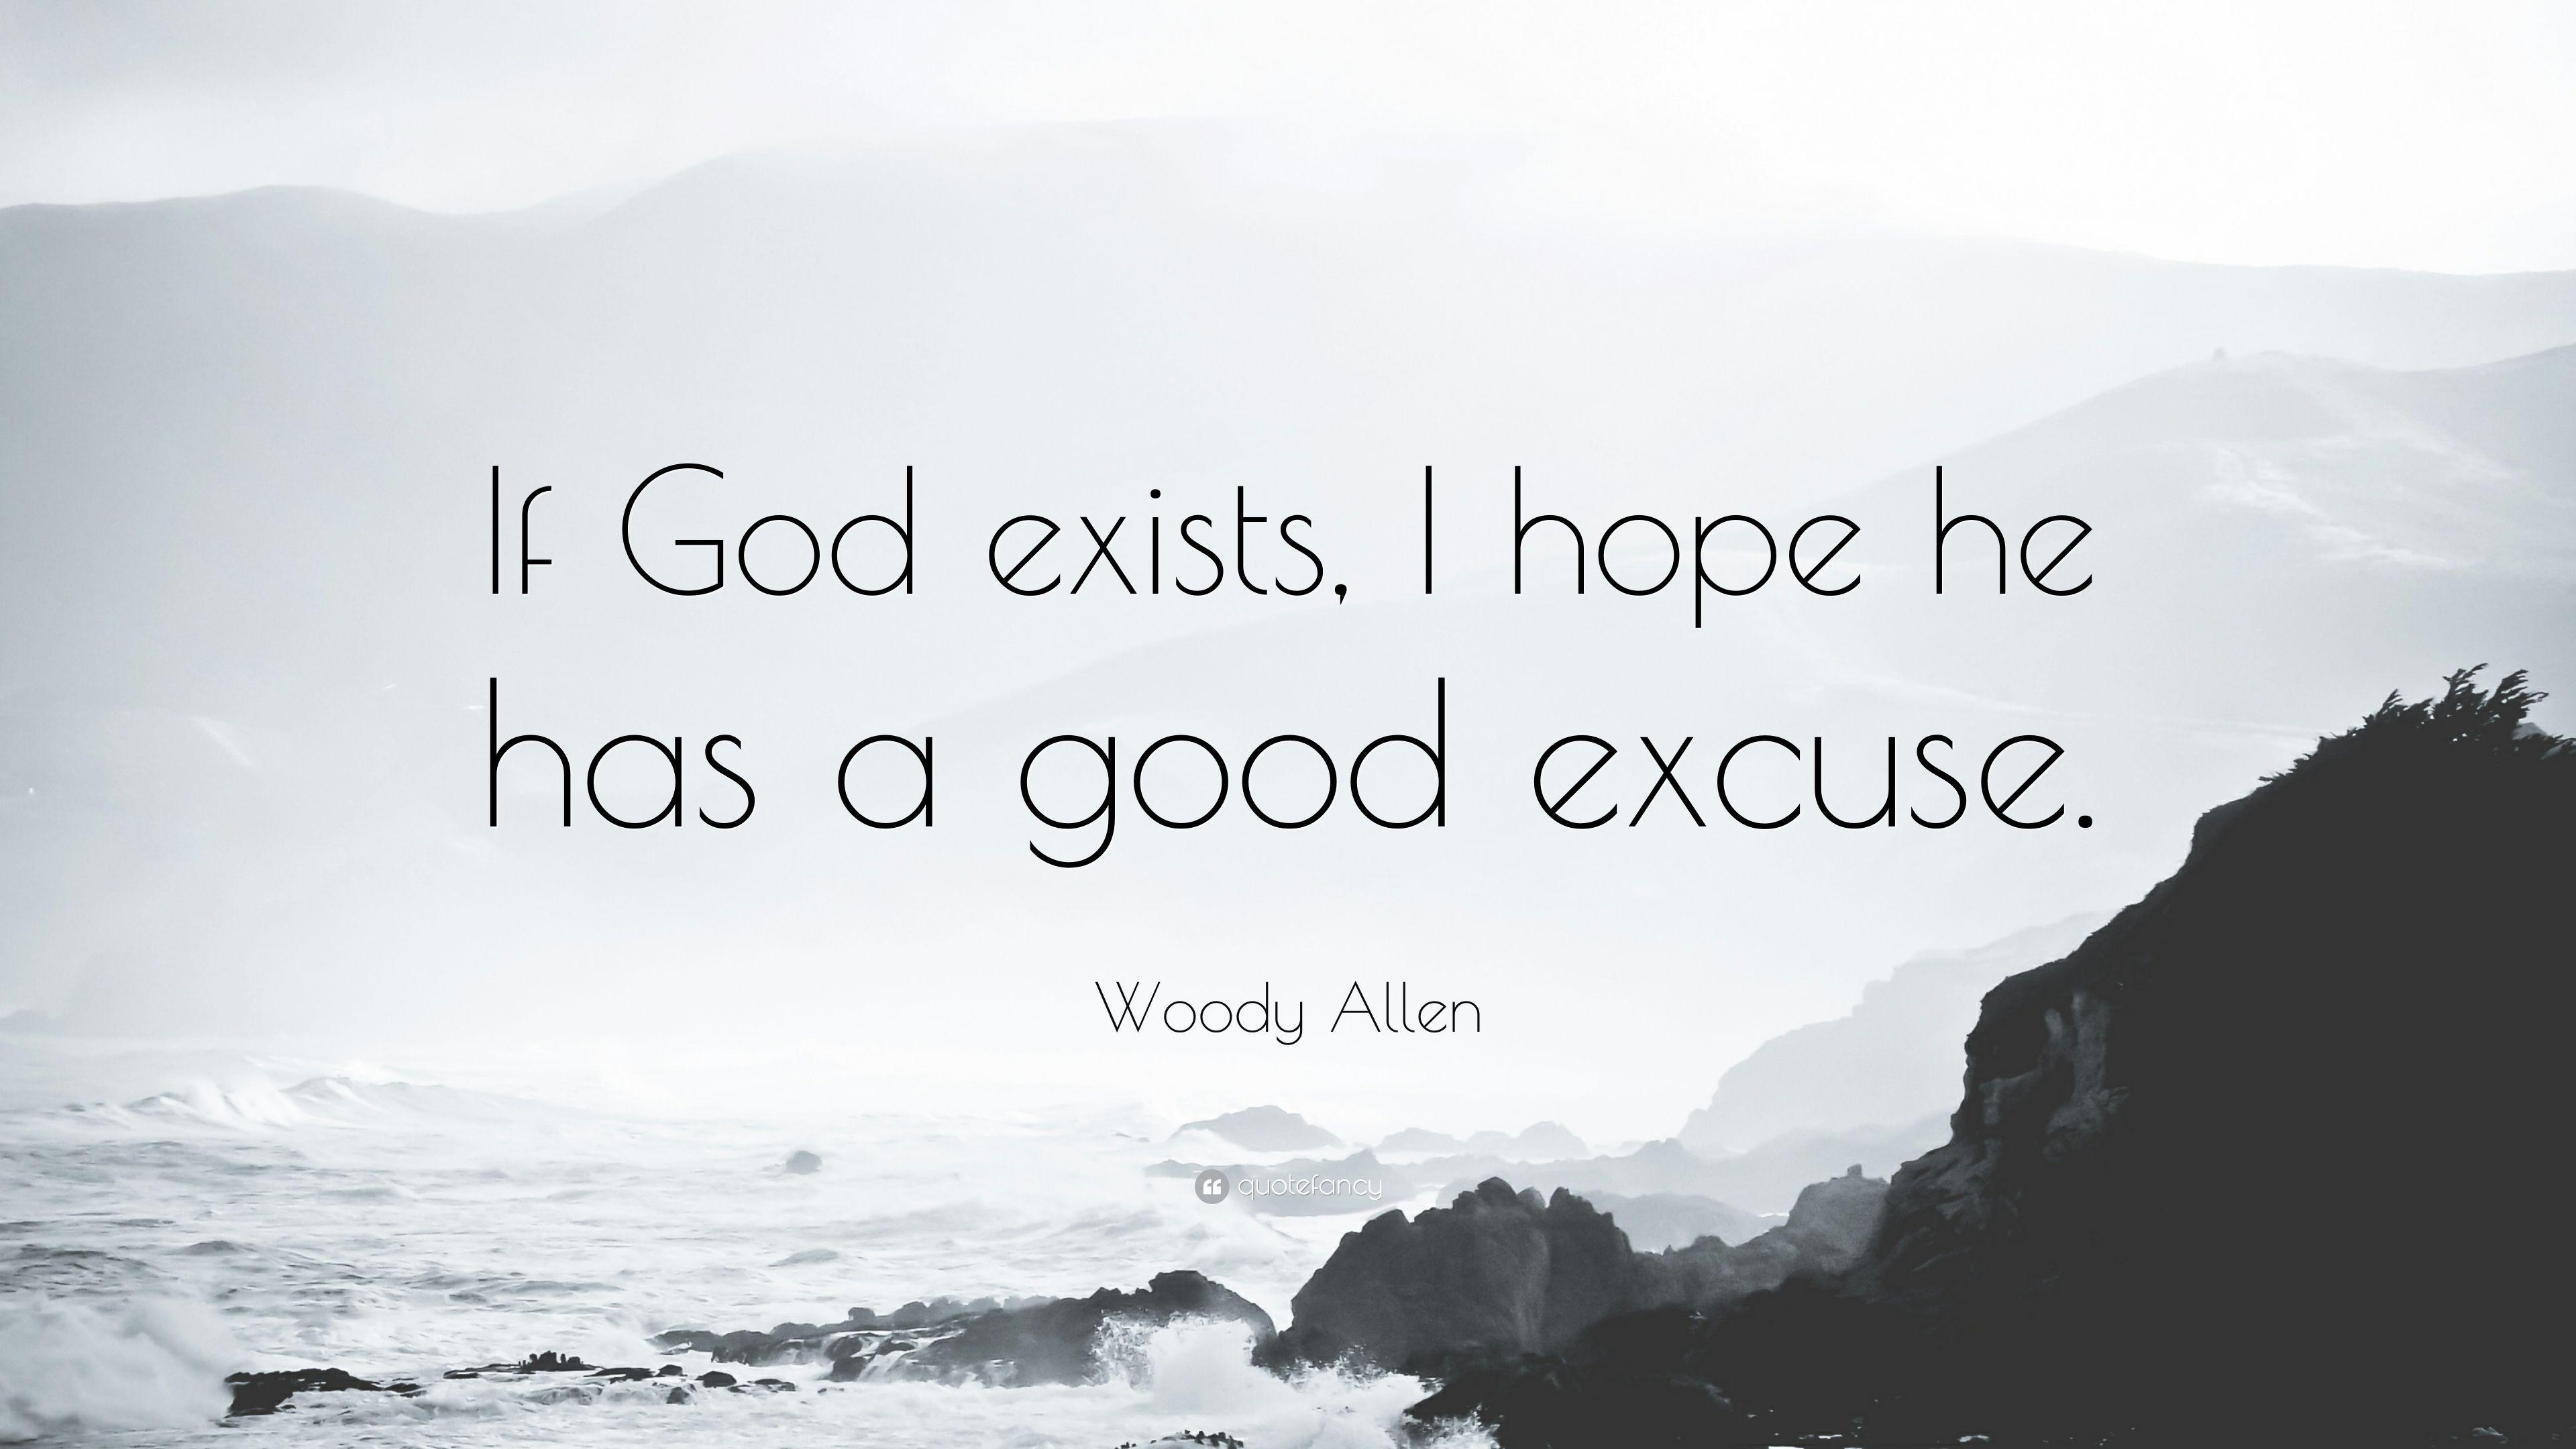 Woody Allen Quote: “If God exists, I hope he has a good excuse